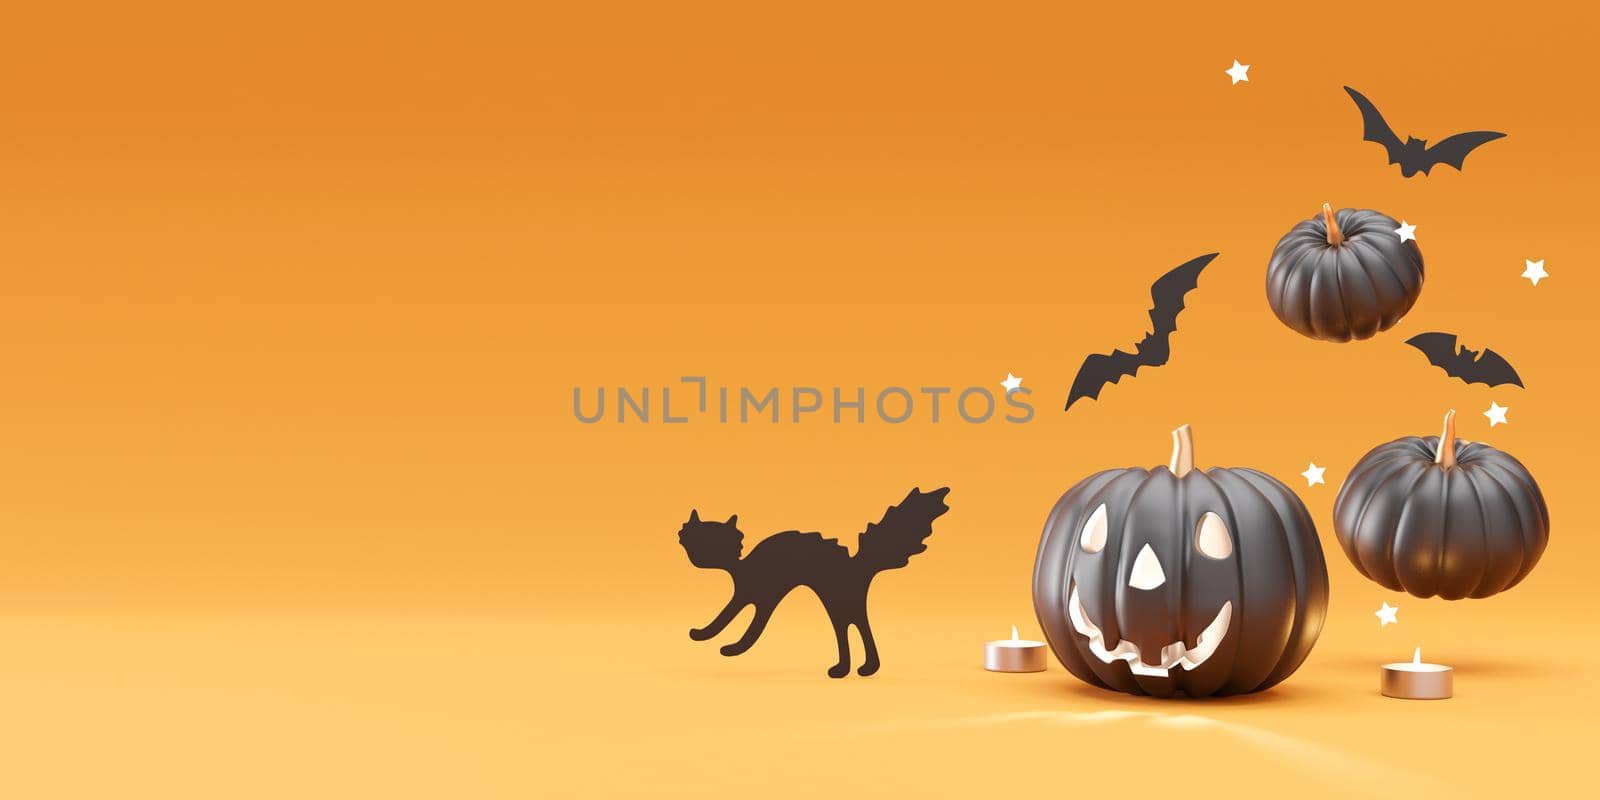 Halloween decoration on orange background. Free, copy space for your text or logo. Halloween banner, mock up design, template for advertising. Black pumpkin, bat, cat, candles. 3D rendering